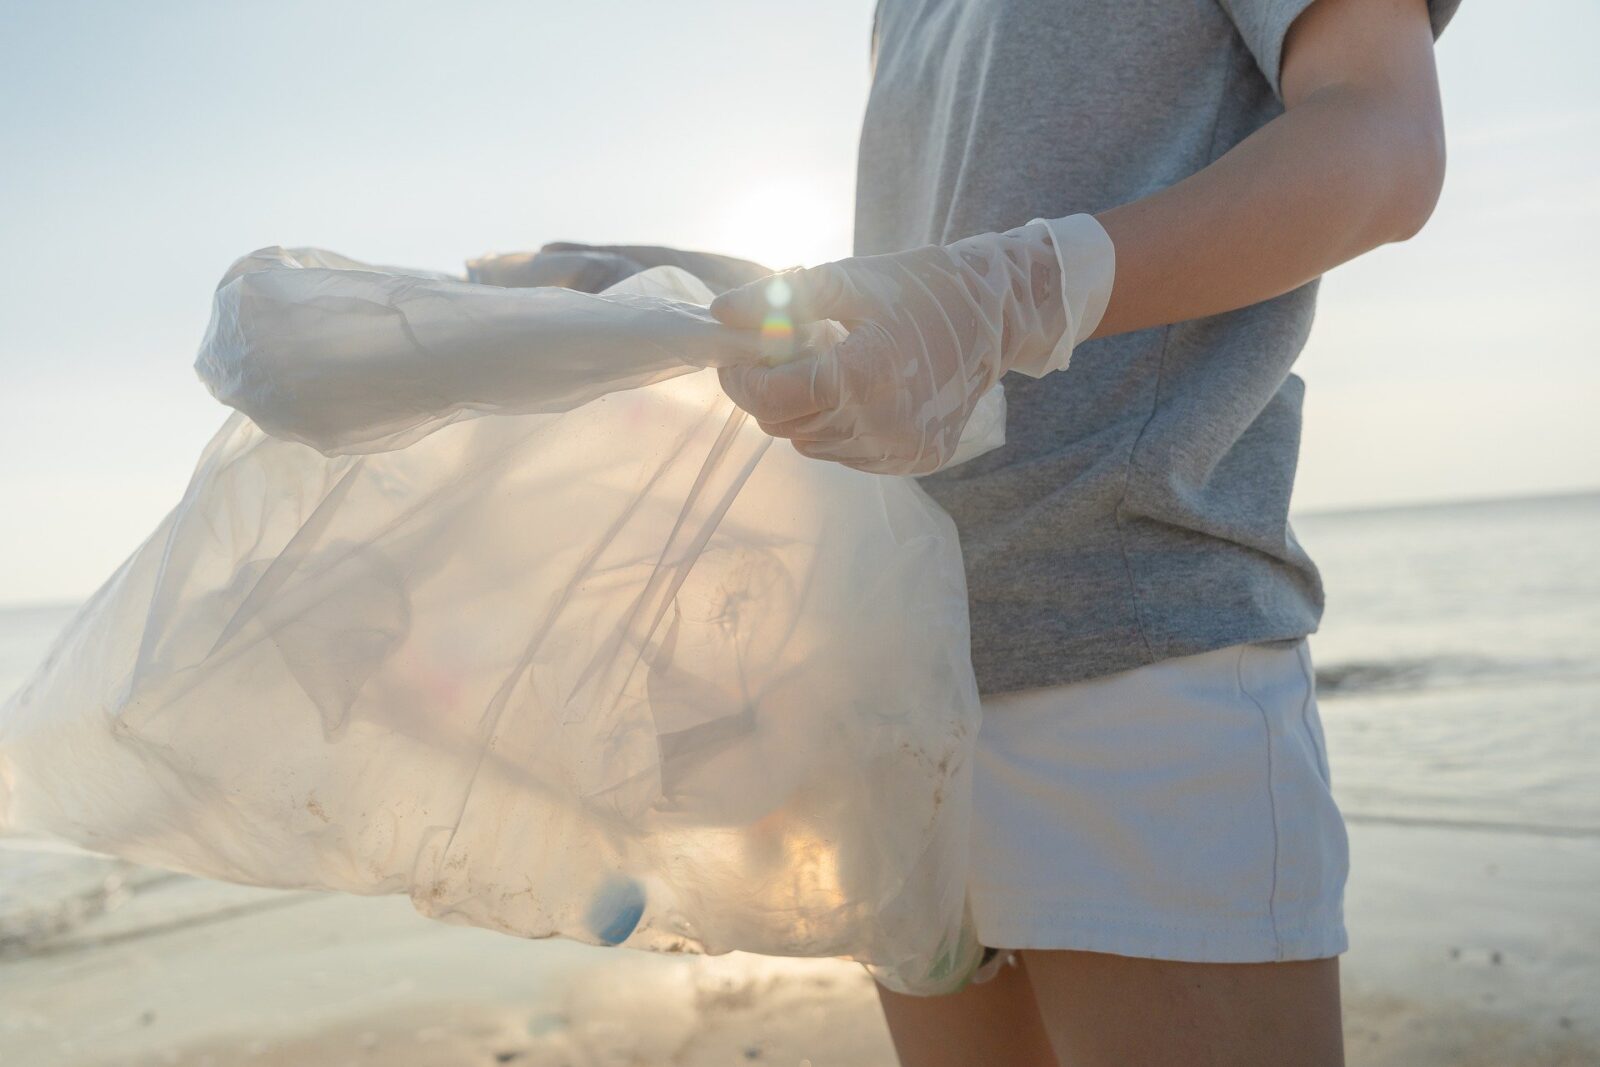 LASIK can save the amount of plastic from being thrown away